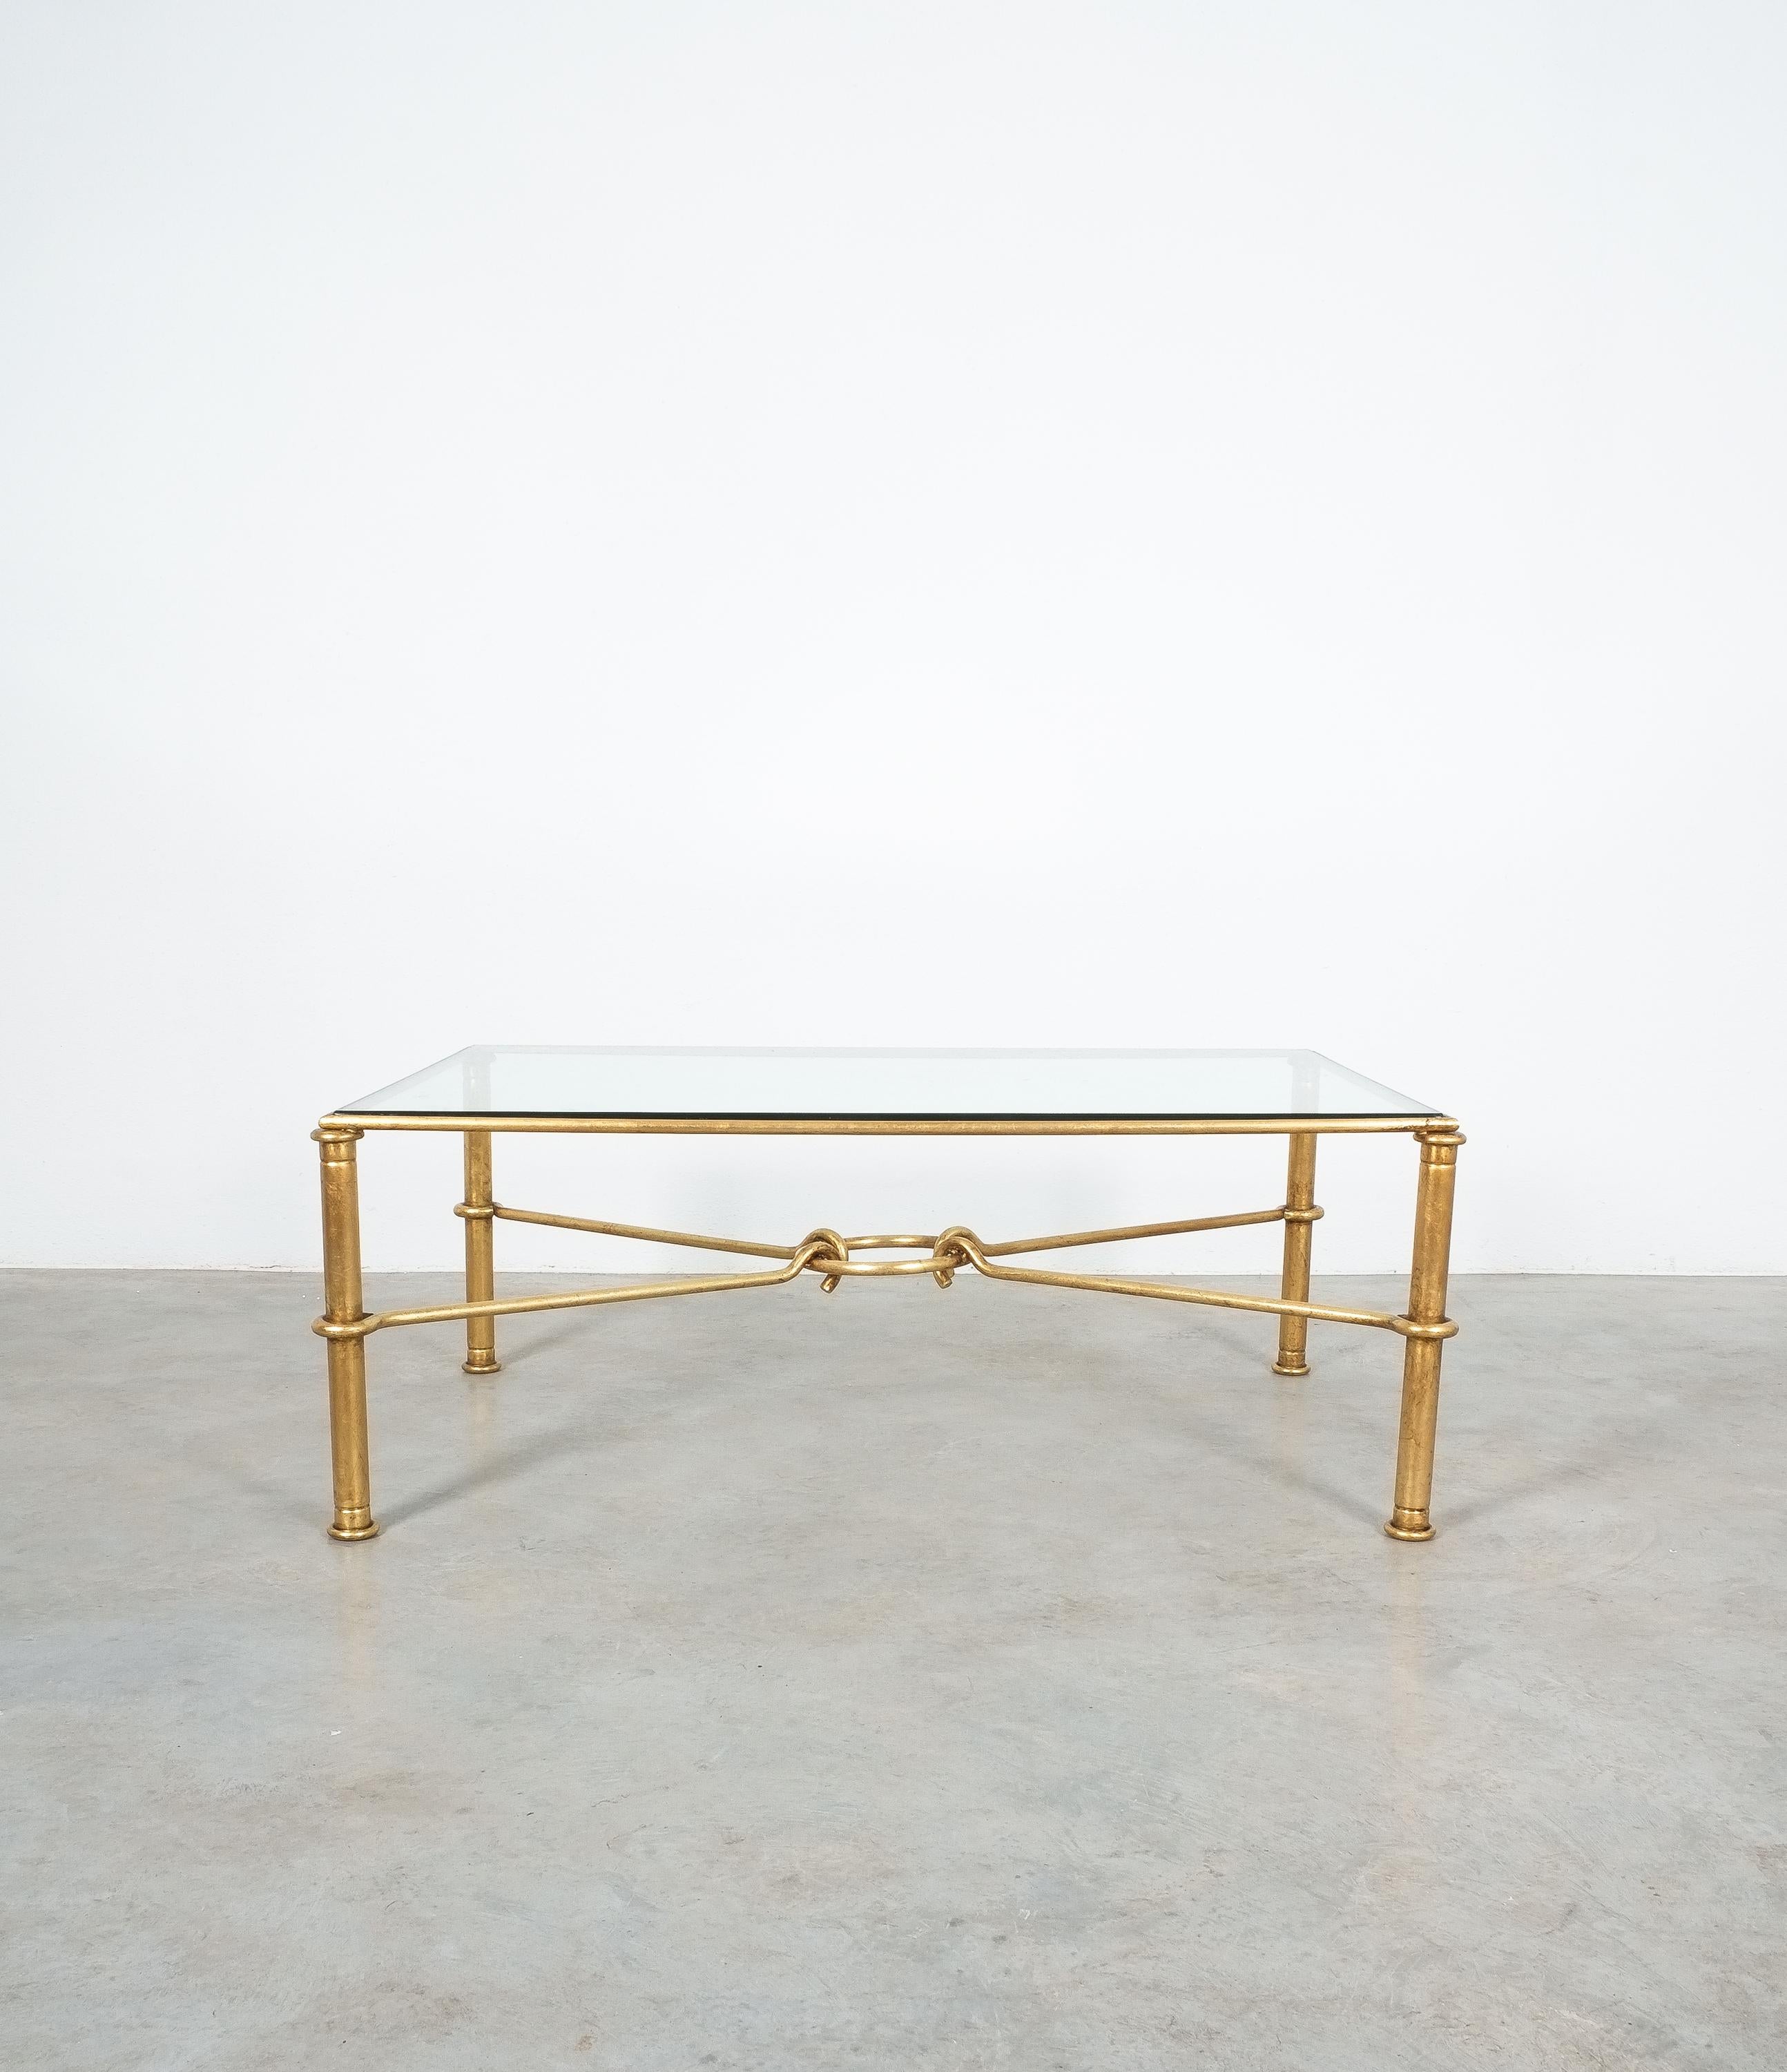 Very large gilt iron coffee table for Hermes by artist/designer Giovanni Banci, Italy, circa 1970

Large center coffee table neoclassical Hermes styling utilizing rings and hooks to simulate a horse bit. The thick high quality glass with